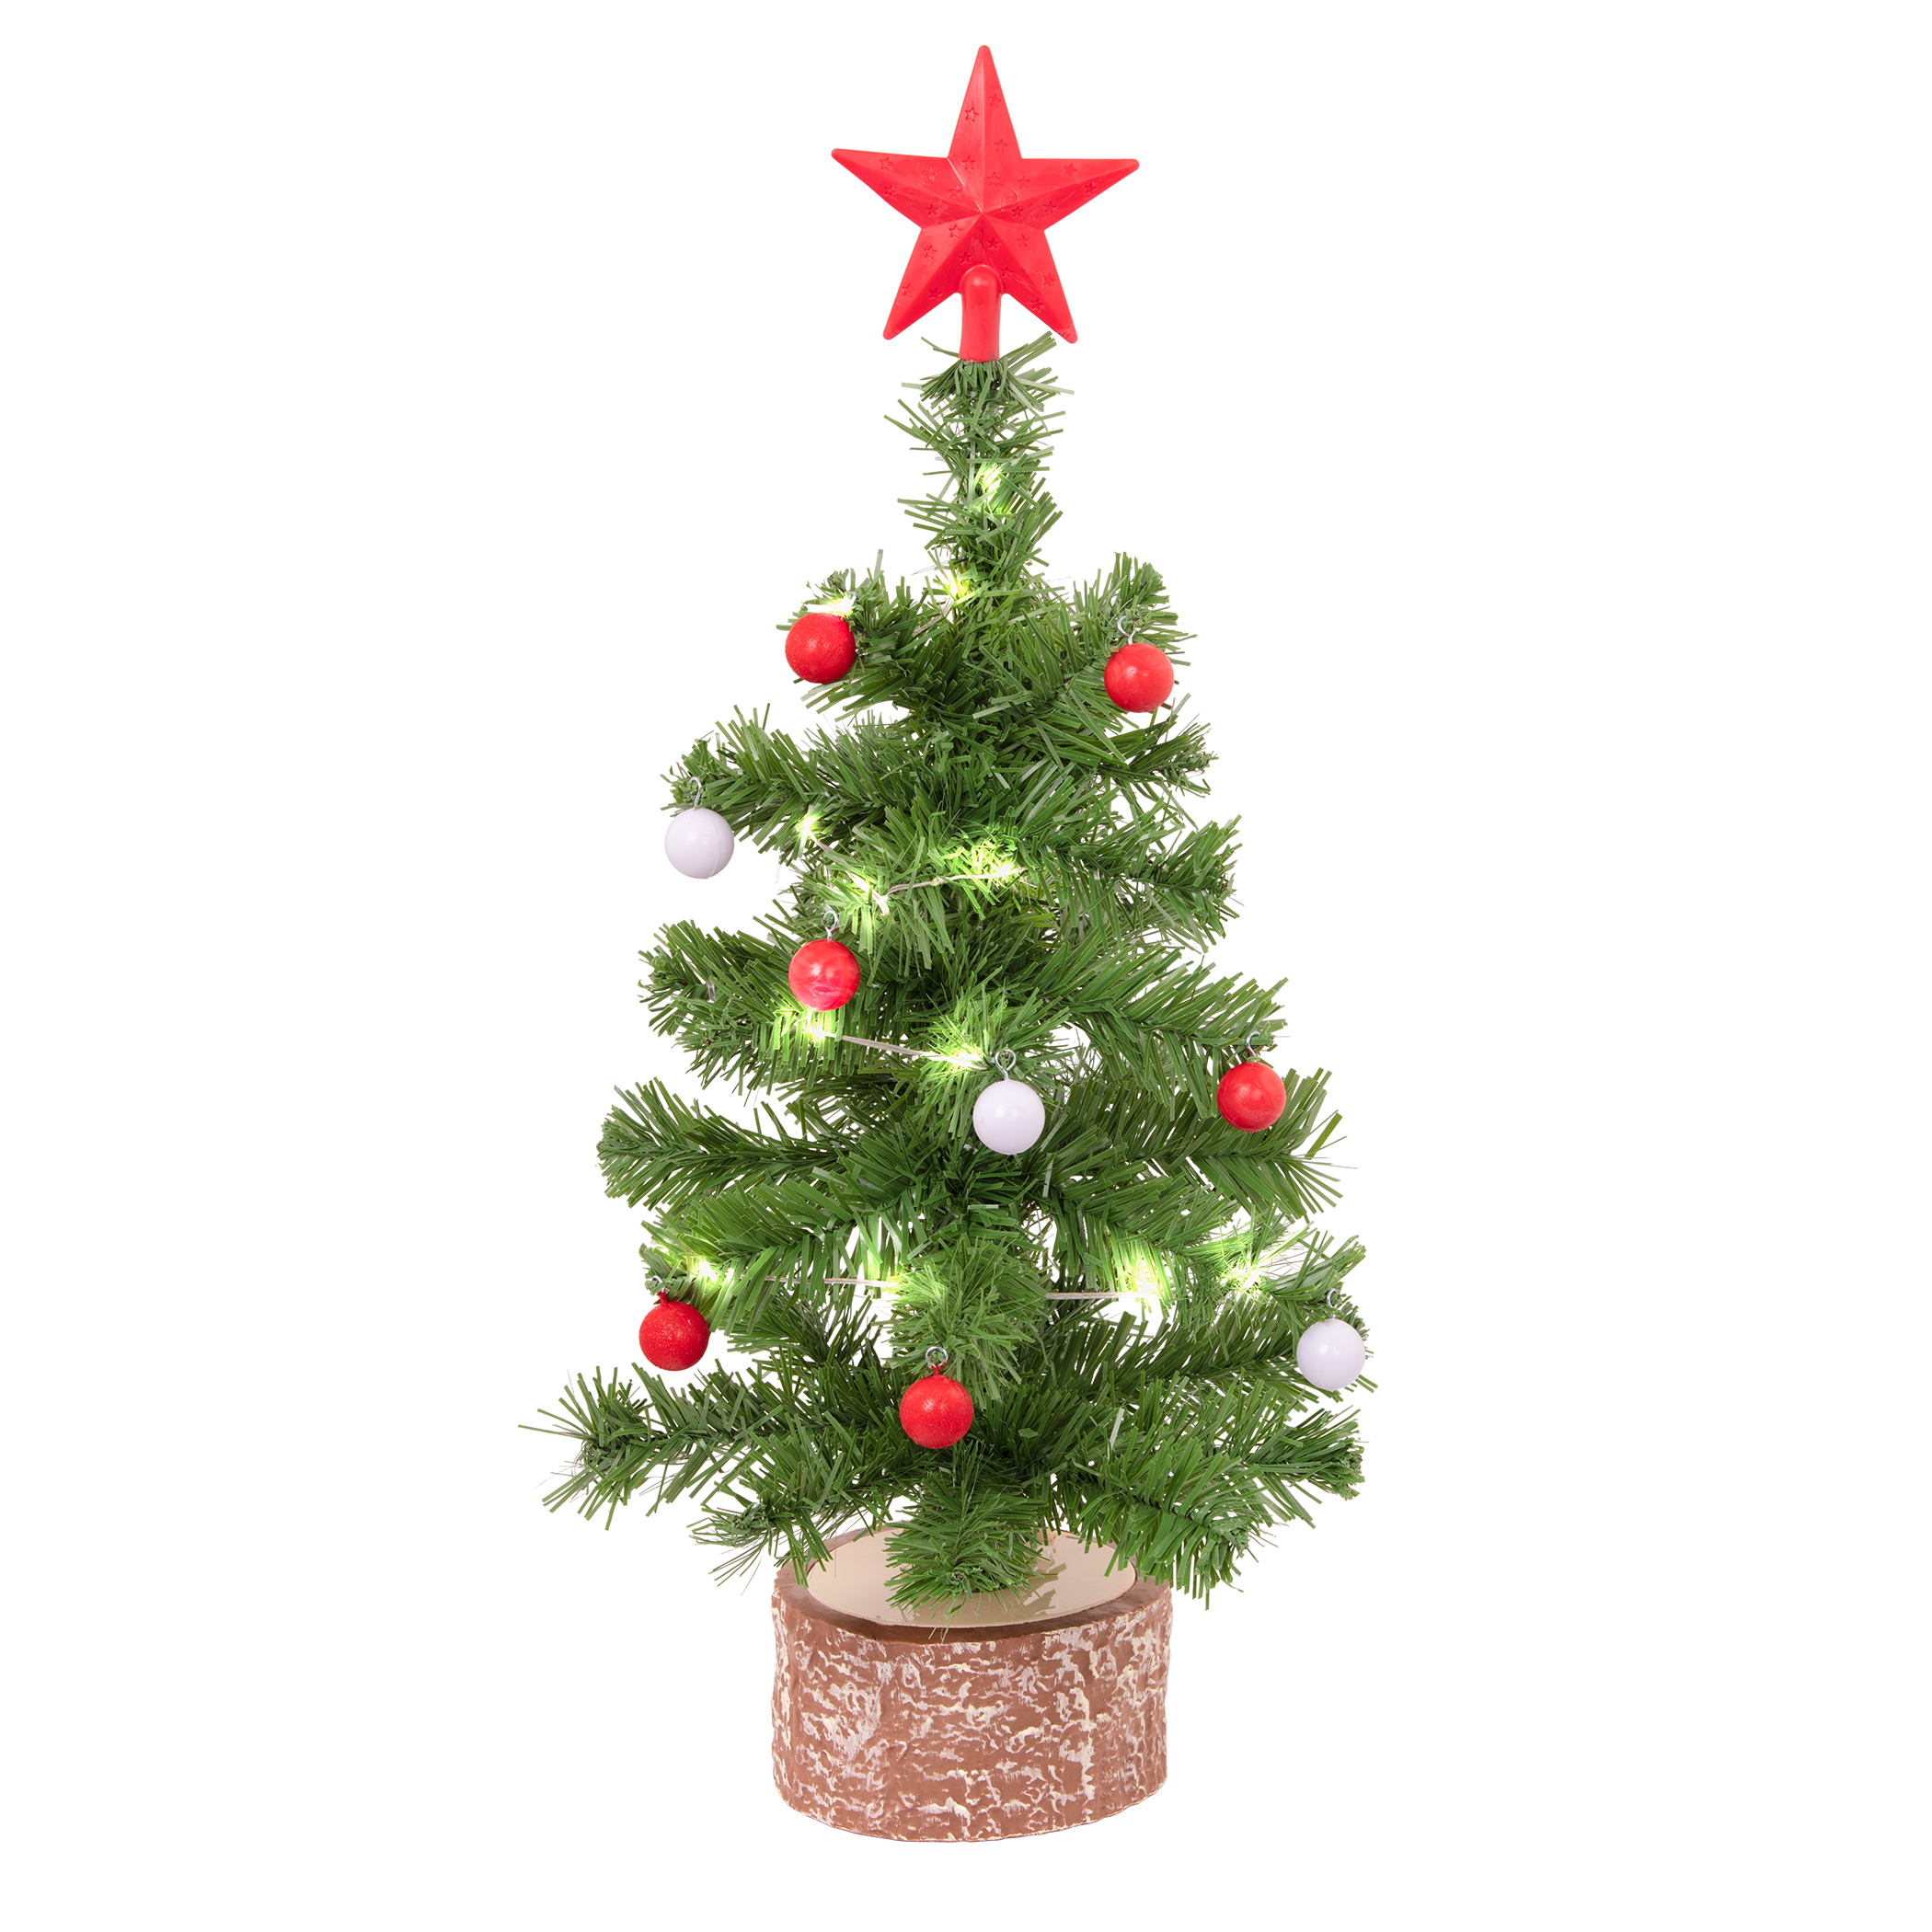 Toy Christmas tree with lights, ornaments and star